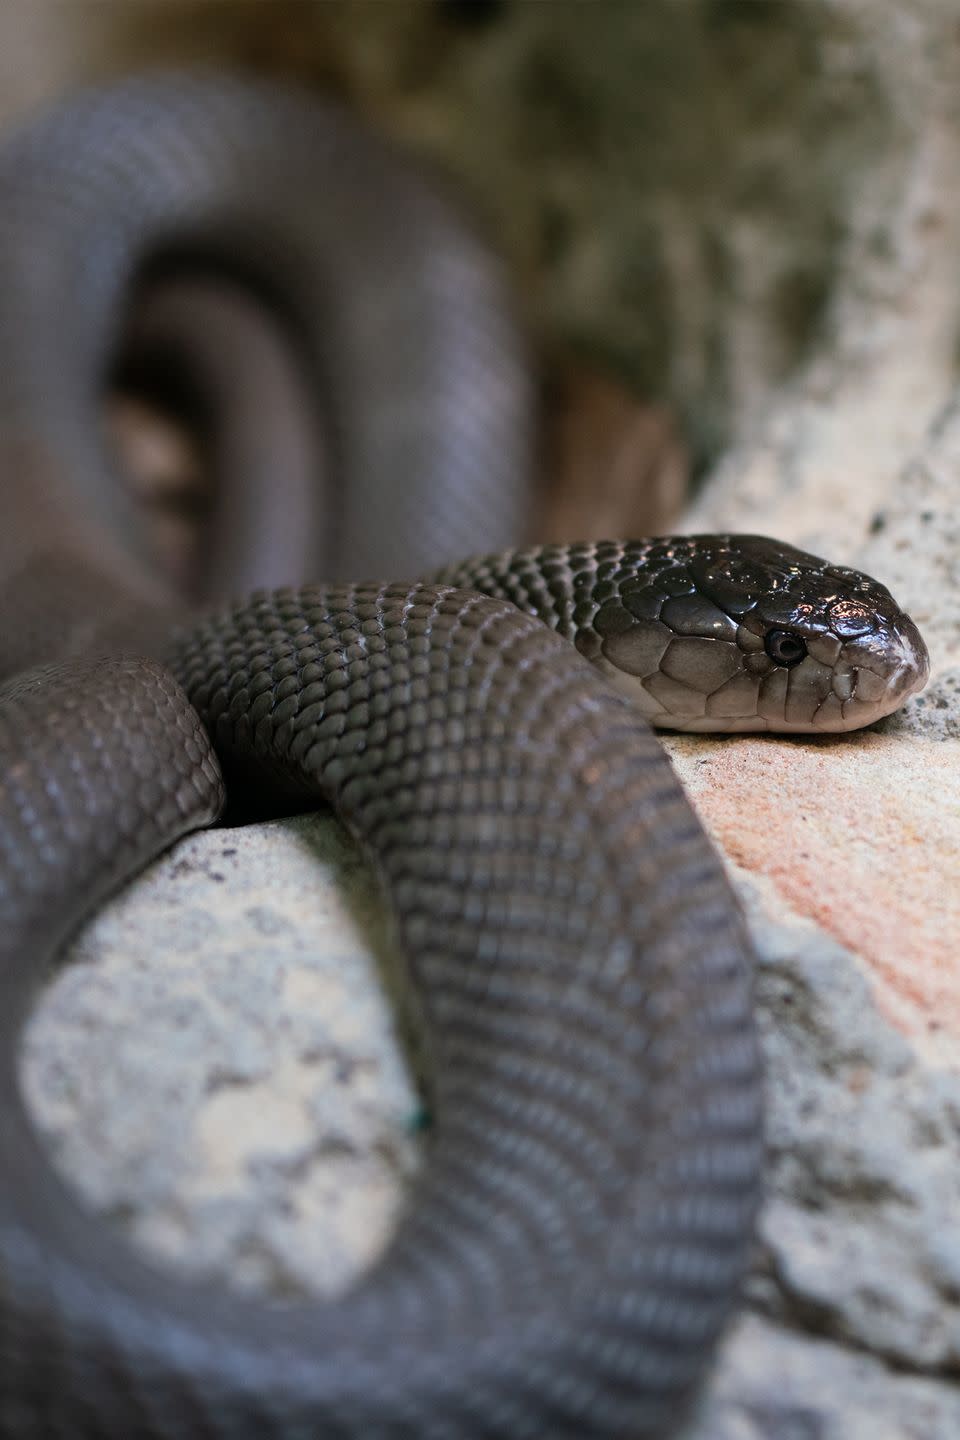 27) Inland taipan snakes have the most potent venom